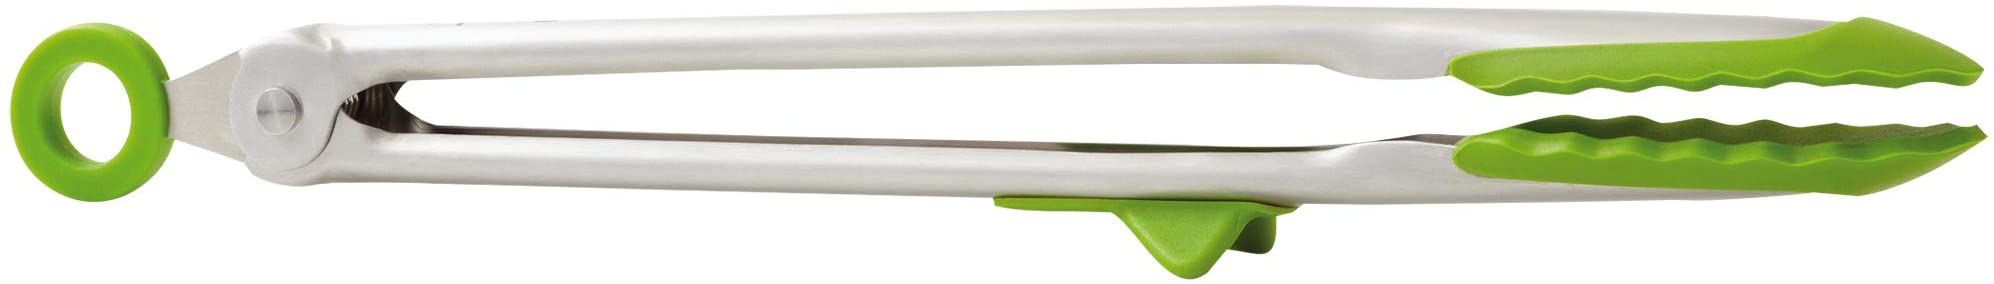 Tovolo Tip Top Tongs, Lime